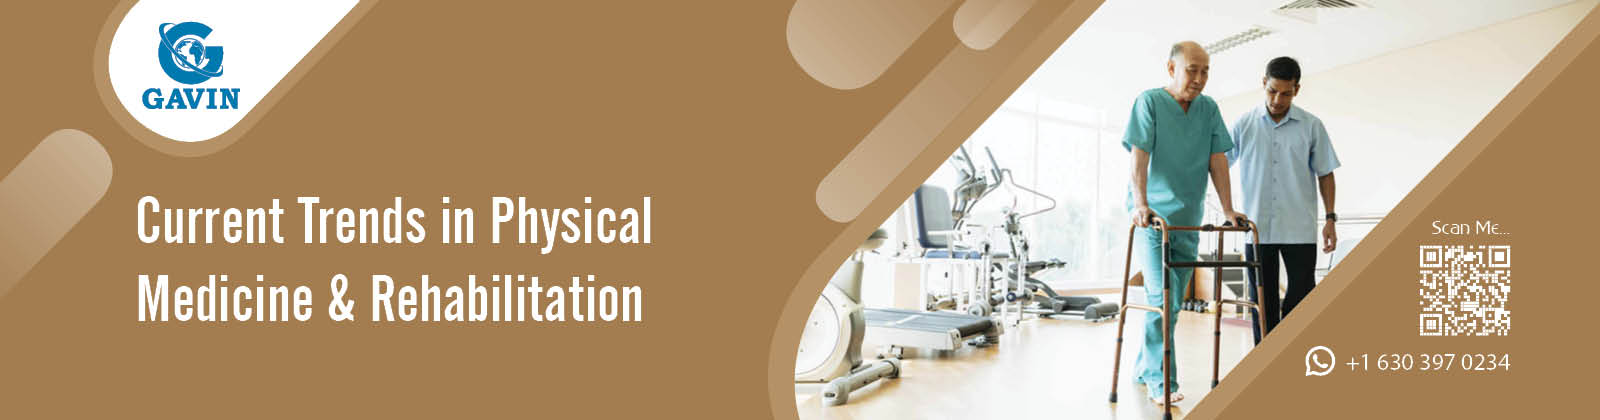 Current Trends in Physical Medicine & Rehabilitation